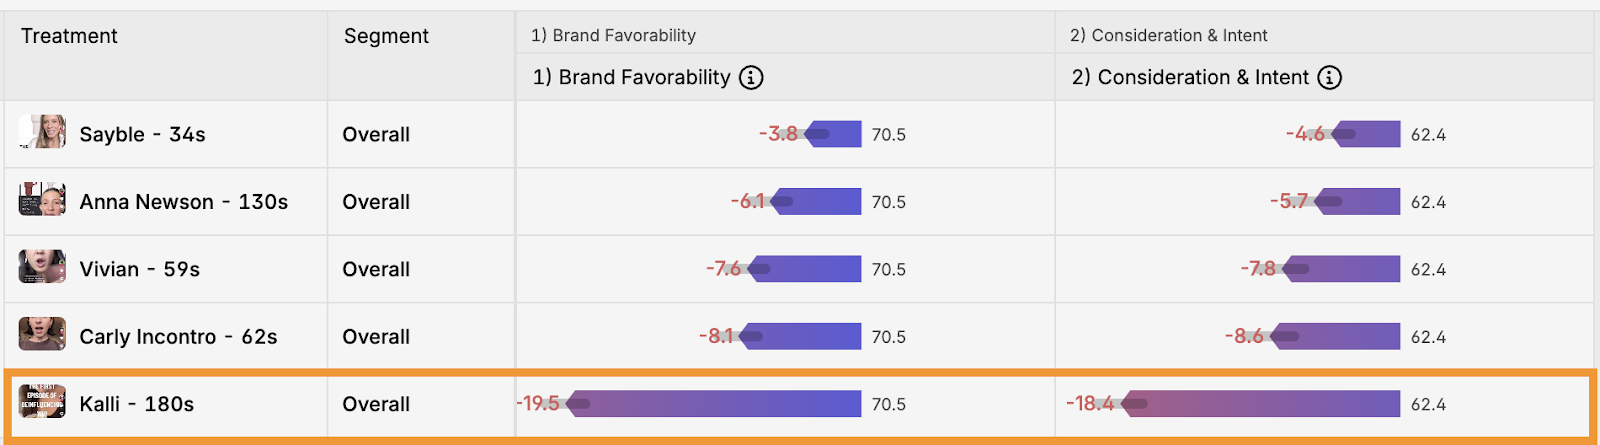 Colored bars show that 5 of 5 Stanley Tumbler #deinfluencing videos reduced Brand Favorability and Purchase Intent. One of these videos was highly impactful, with nearly 20-point reductions in Brand Favorability and Purchase Intent.